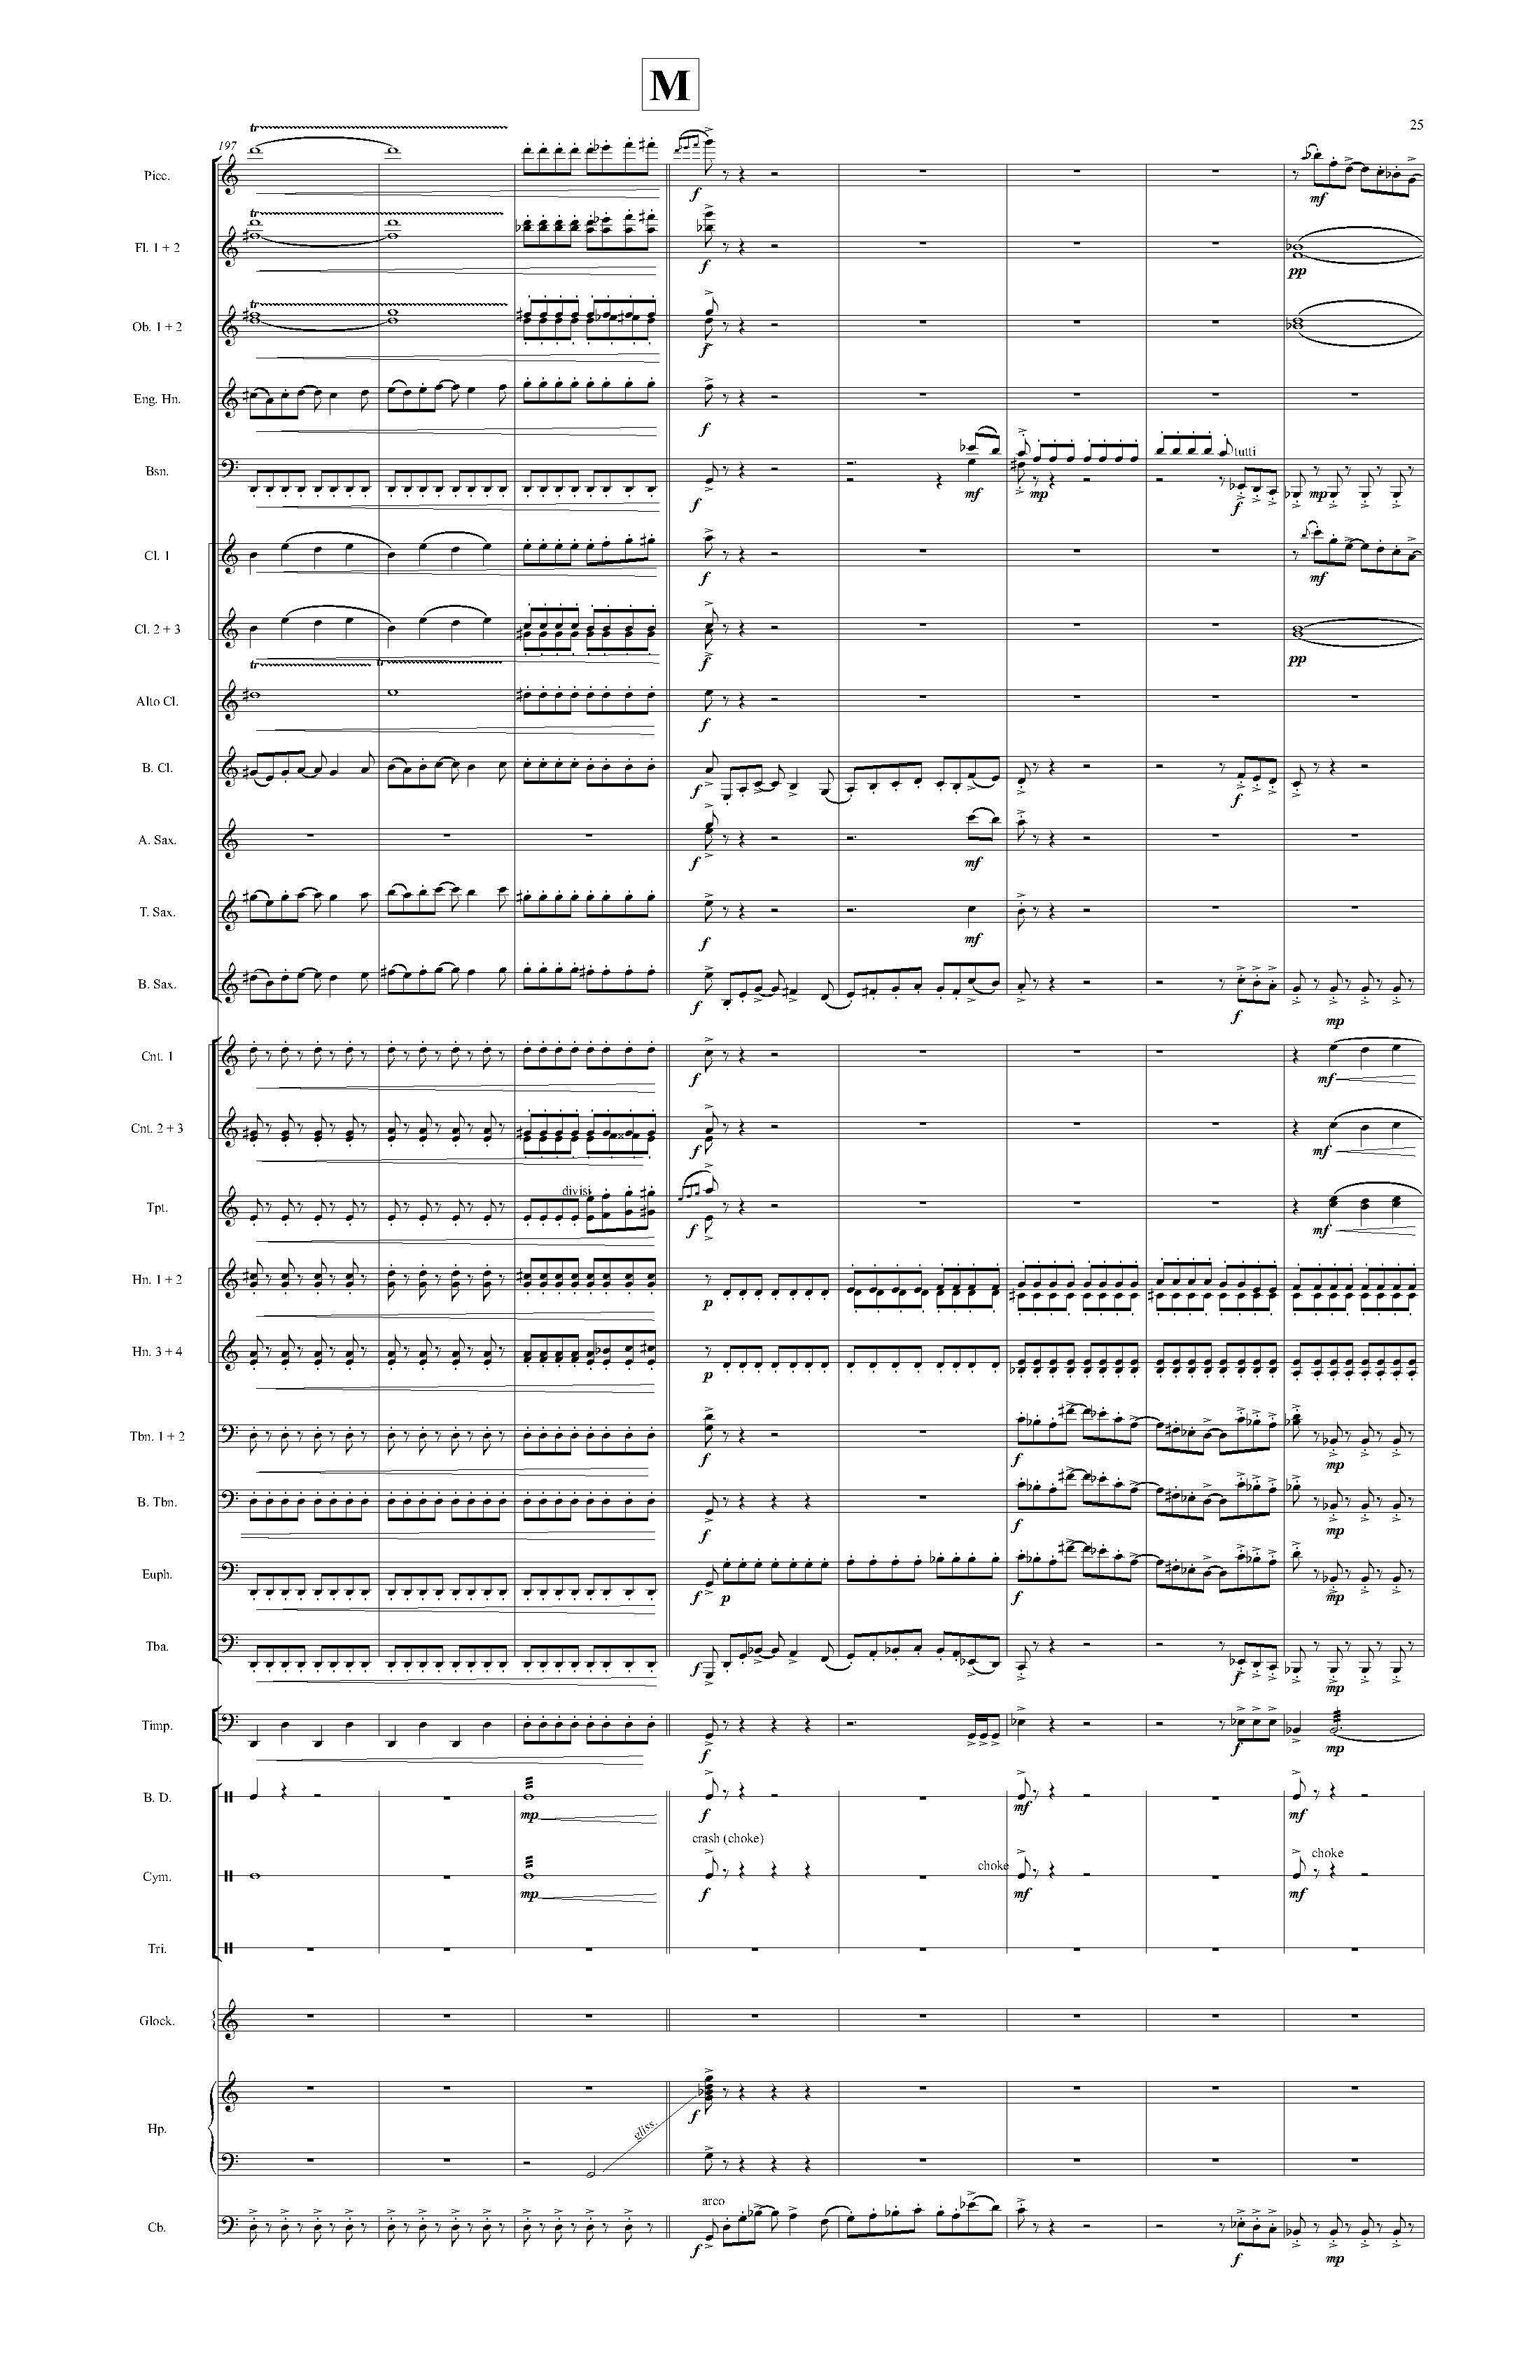 Psyche - Complete Score_Page_31.jpg